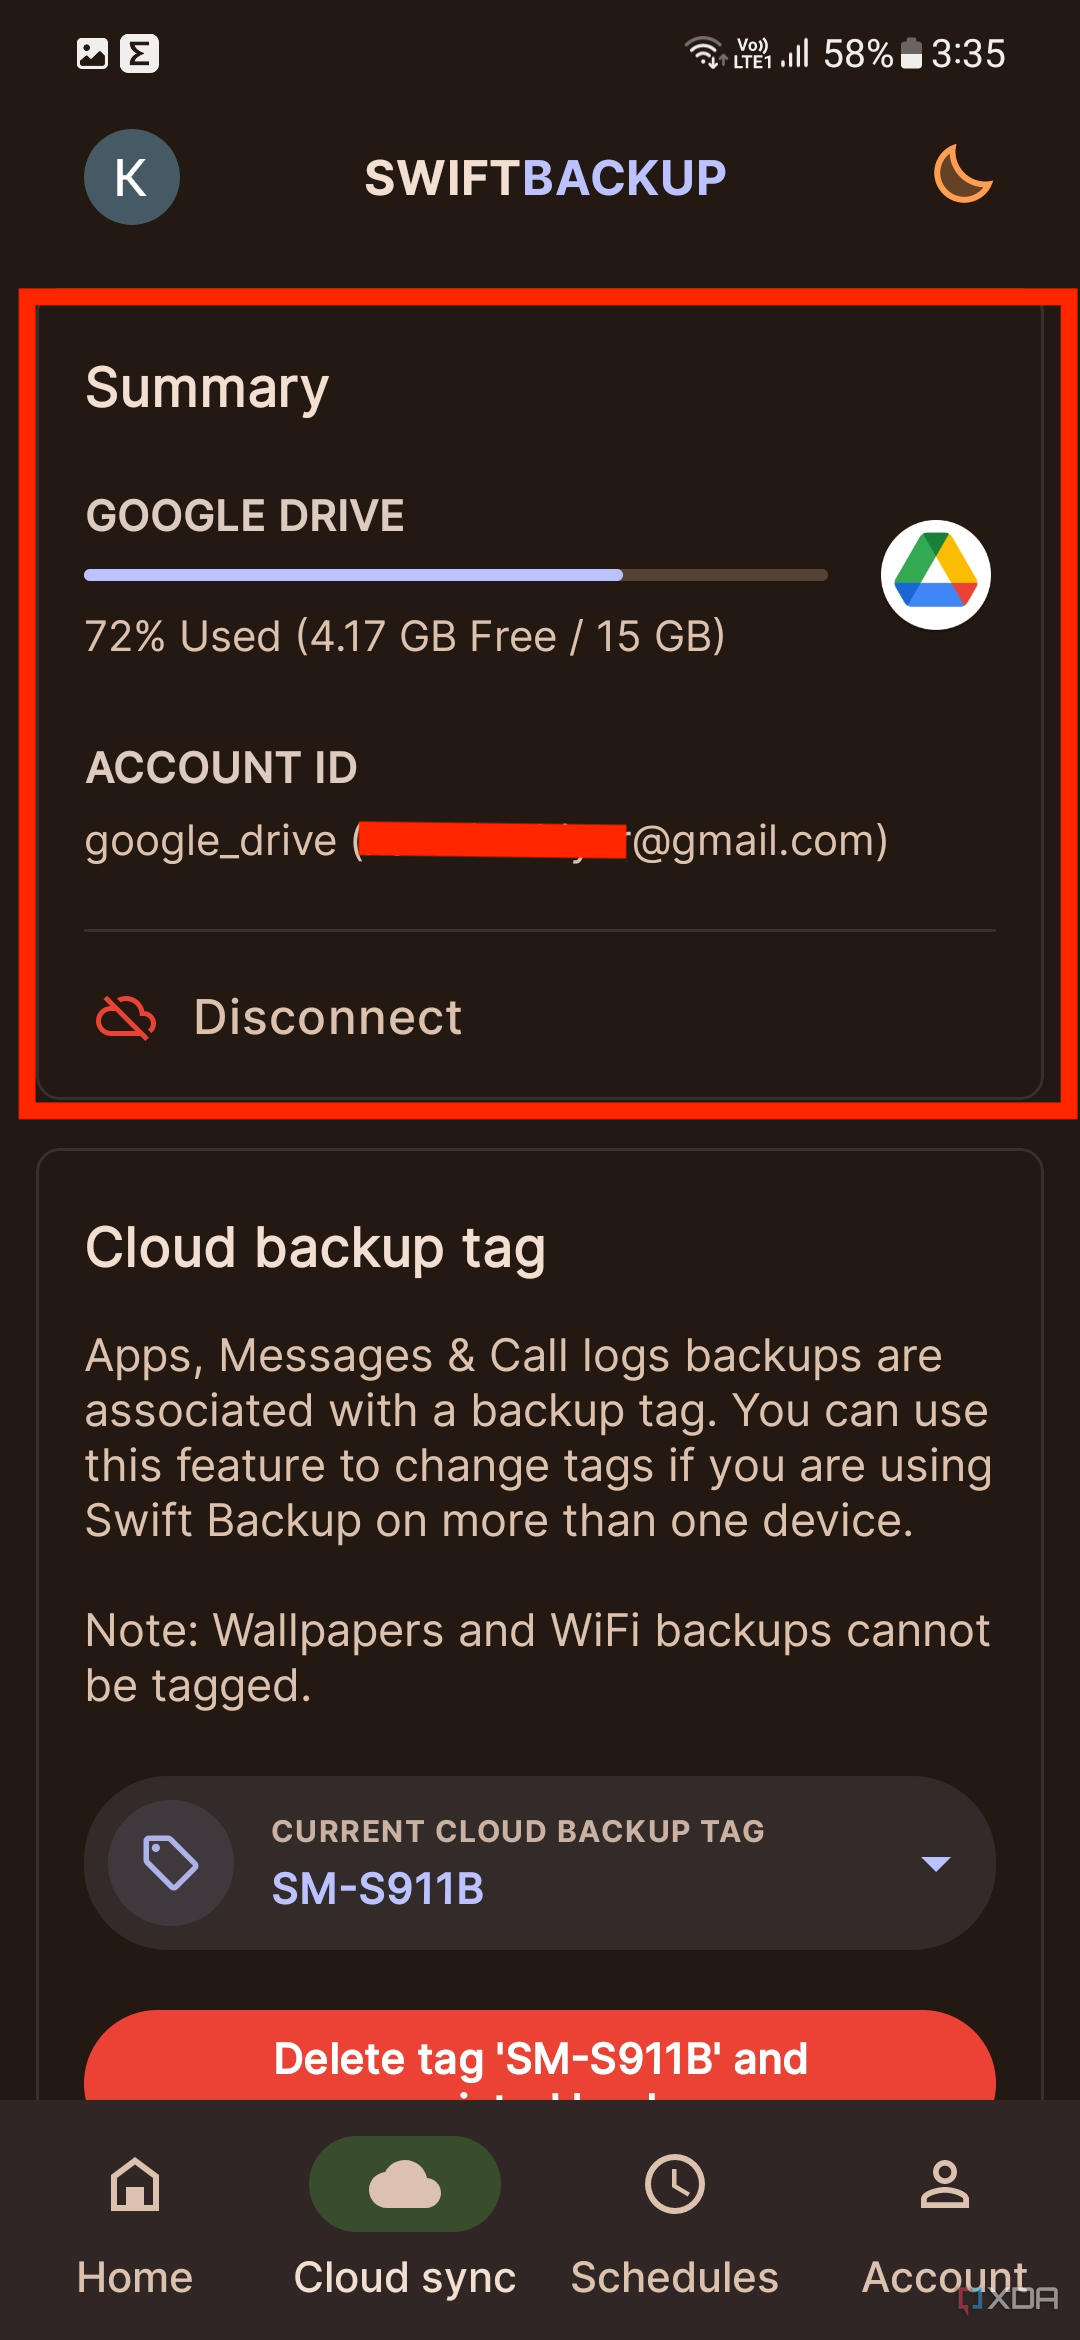 A screenshot showing the cloud connect feature in Swift Backup app.